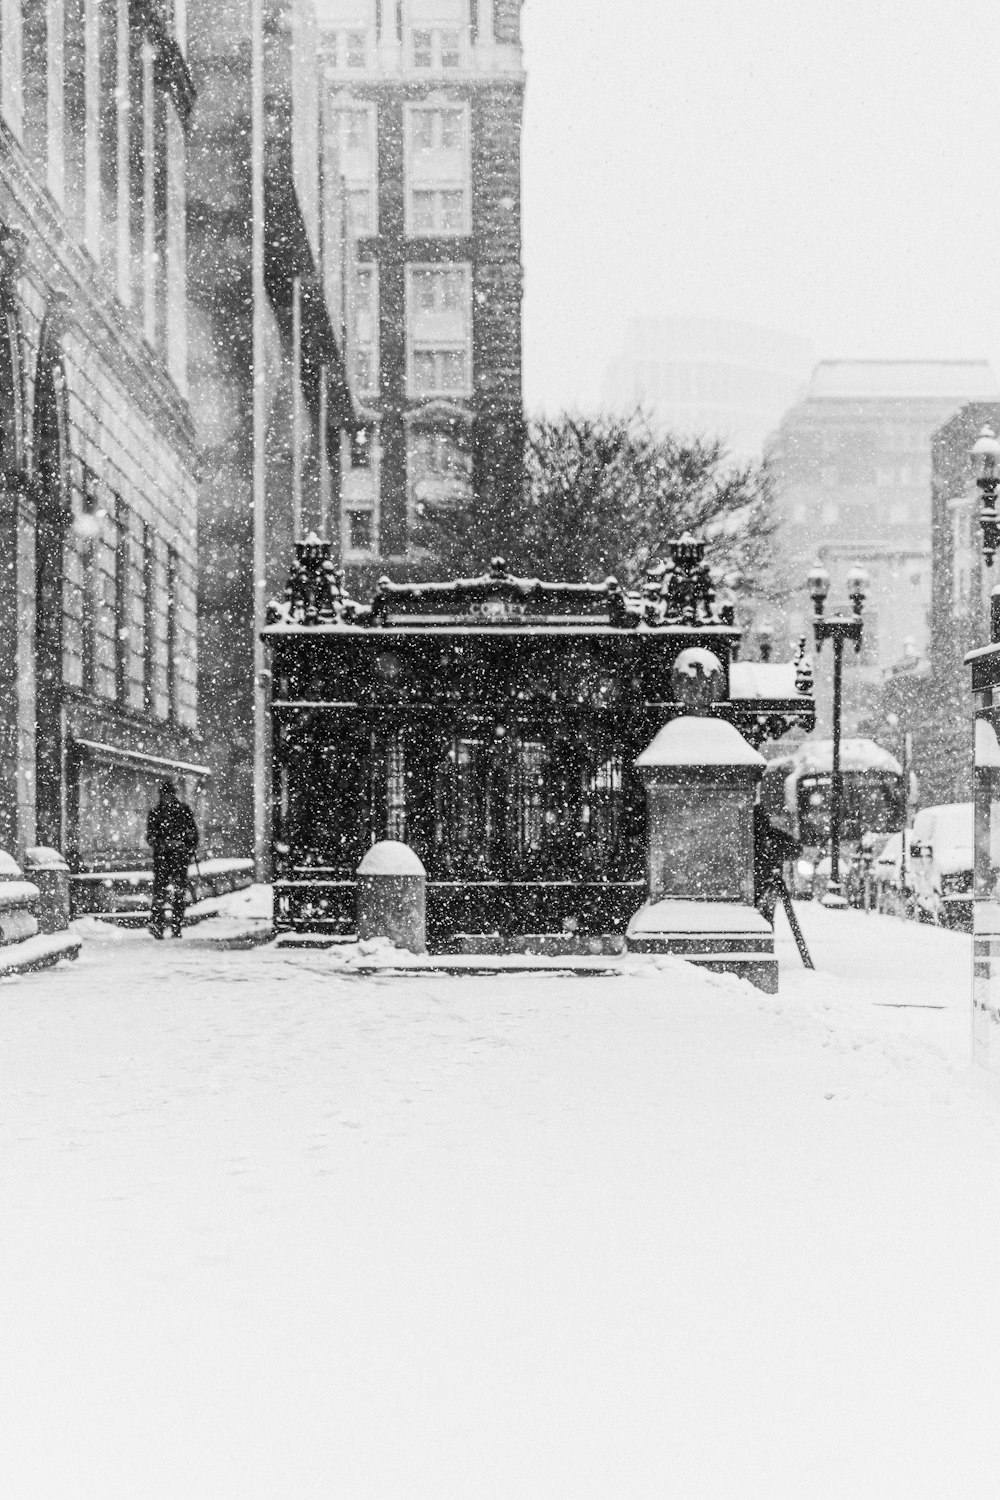 a black and white photo of a snowy street